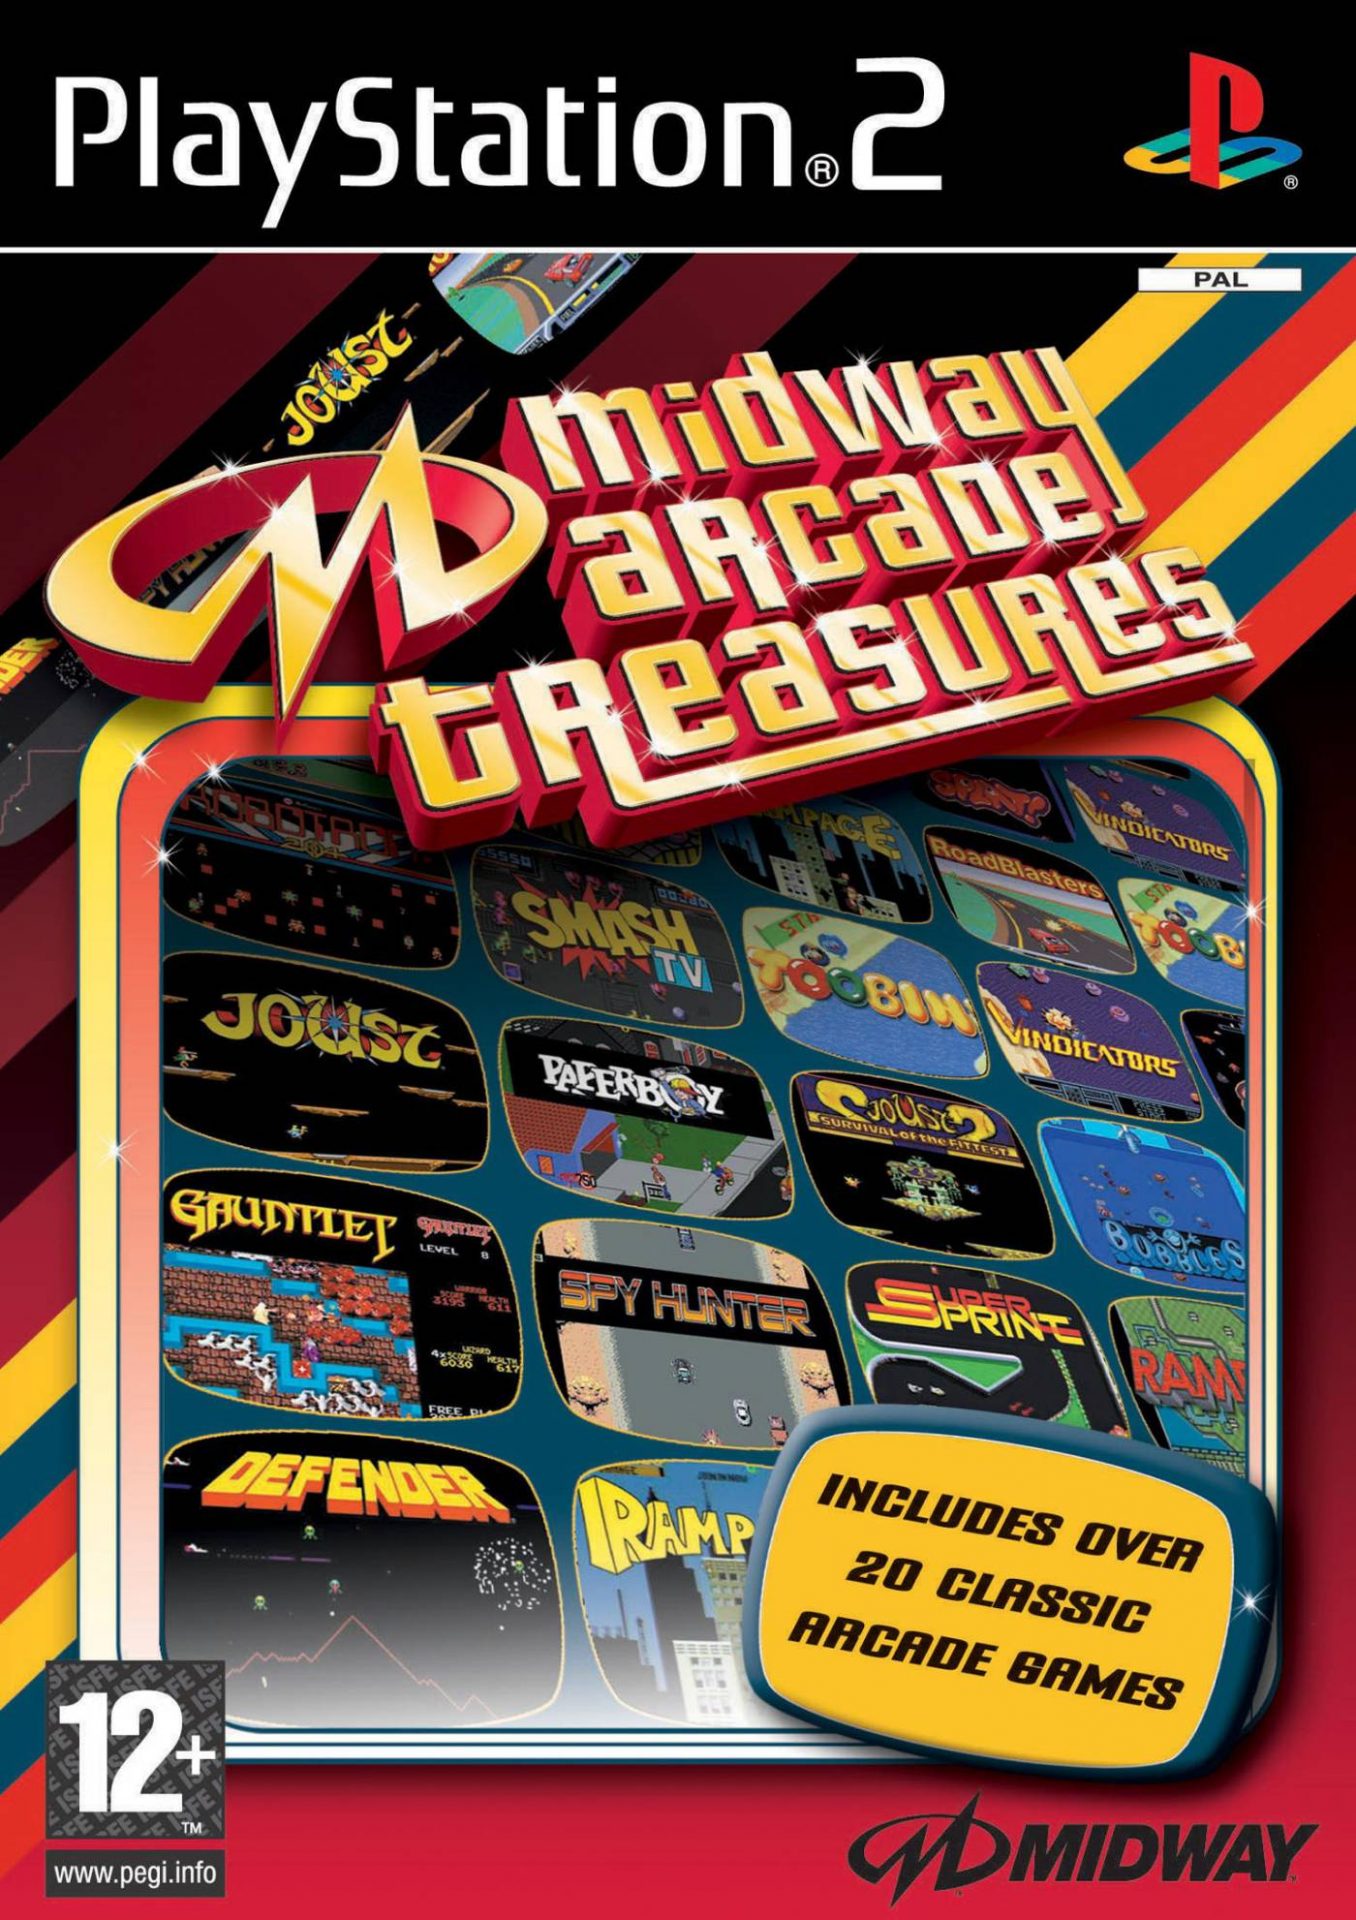 The coverart image of Midway Arcade Treasures